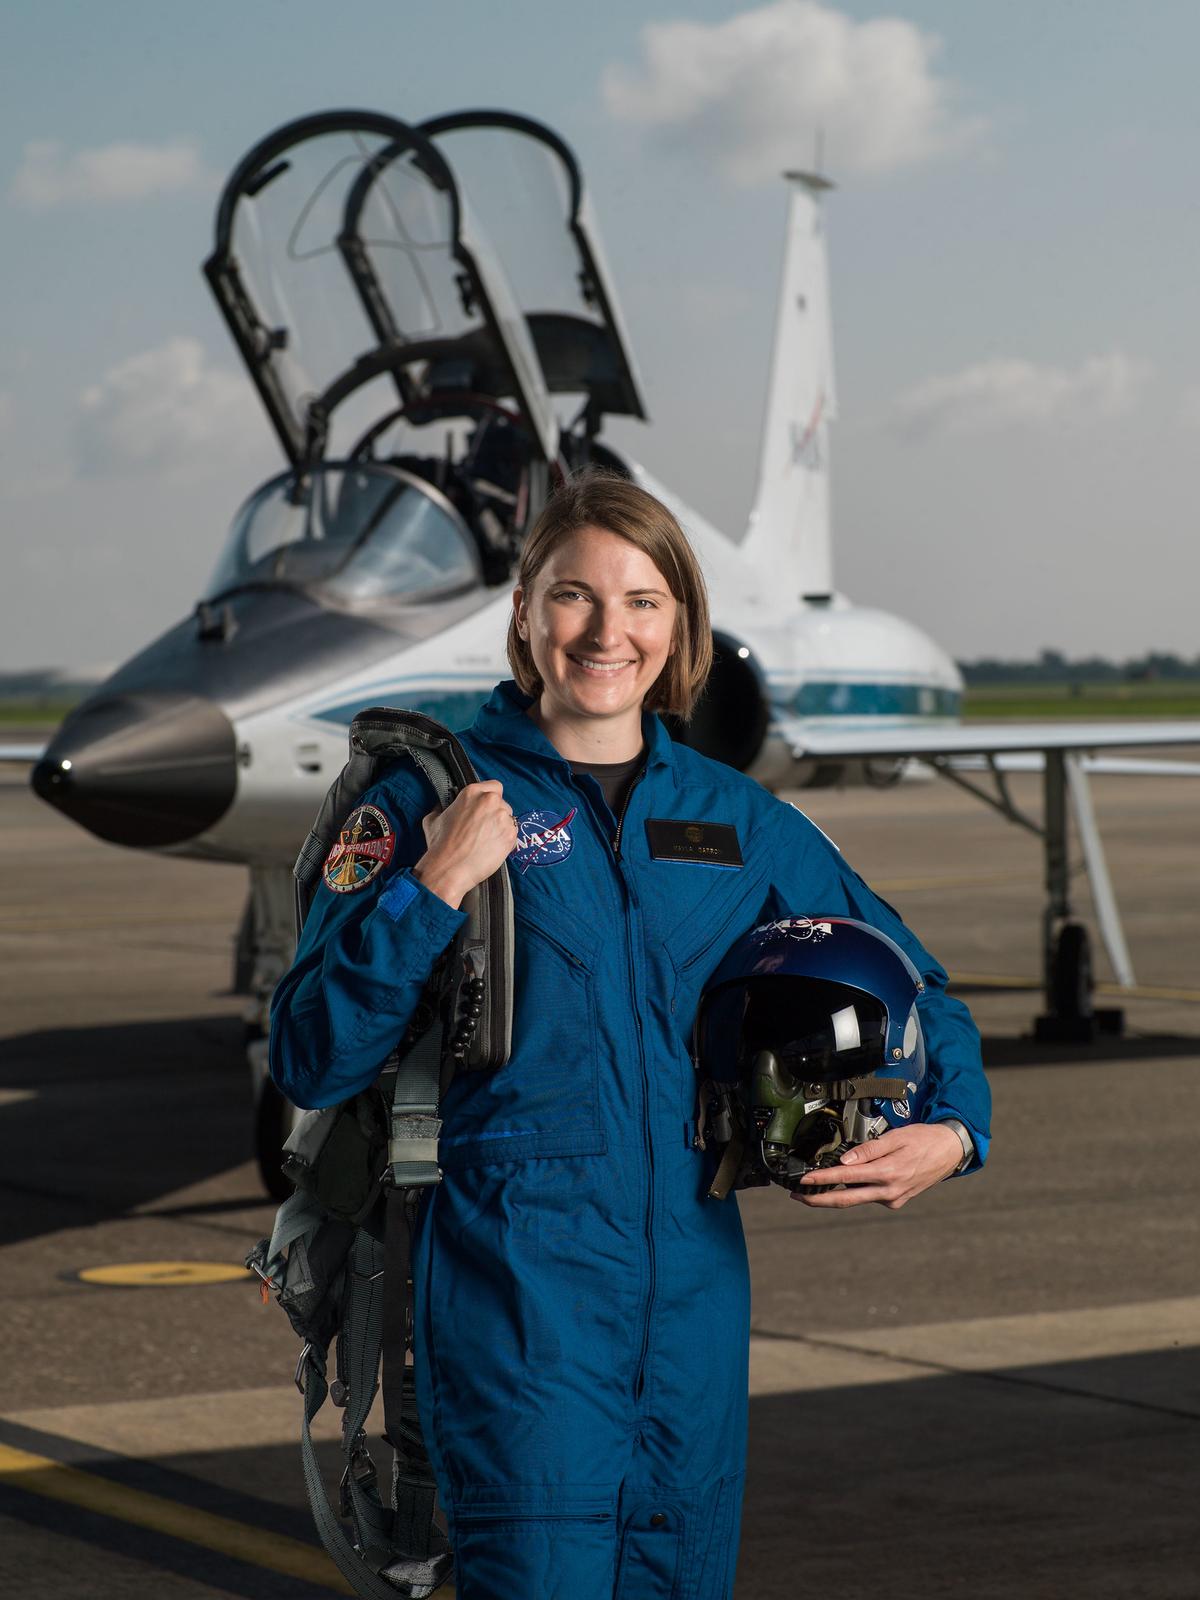 NASA astronaut candidate Kayla Barron pictured at Ellington Field Joint Reserve Base in Houston, Texas, on June 6, 2017 (©NASA | <a href="https://www.flickr.com/photos/nasa2explore/29832827997/in/album-72157698260056092/">Robert Markowitz</a>)